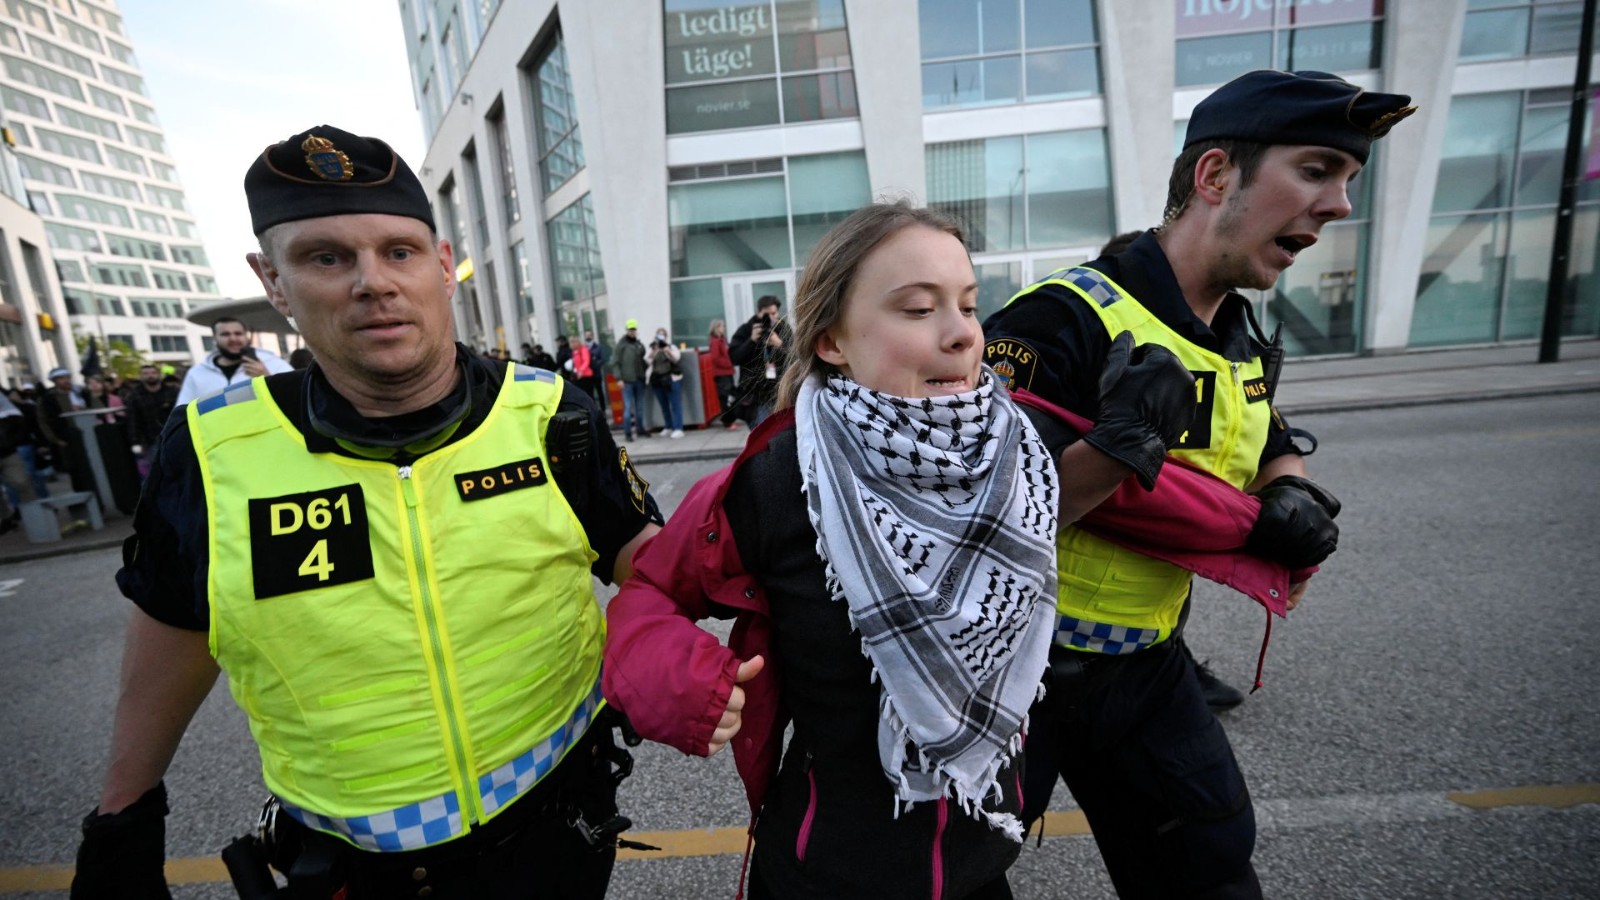 Greta Thunberg is still active - here being detained by police officers after protesting against Israel's participation in the Eurovision Song Contest in Sweden, earlier in May. /Johan Nilsson/TT News Agency via Reuters